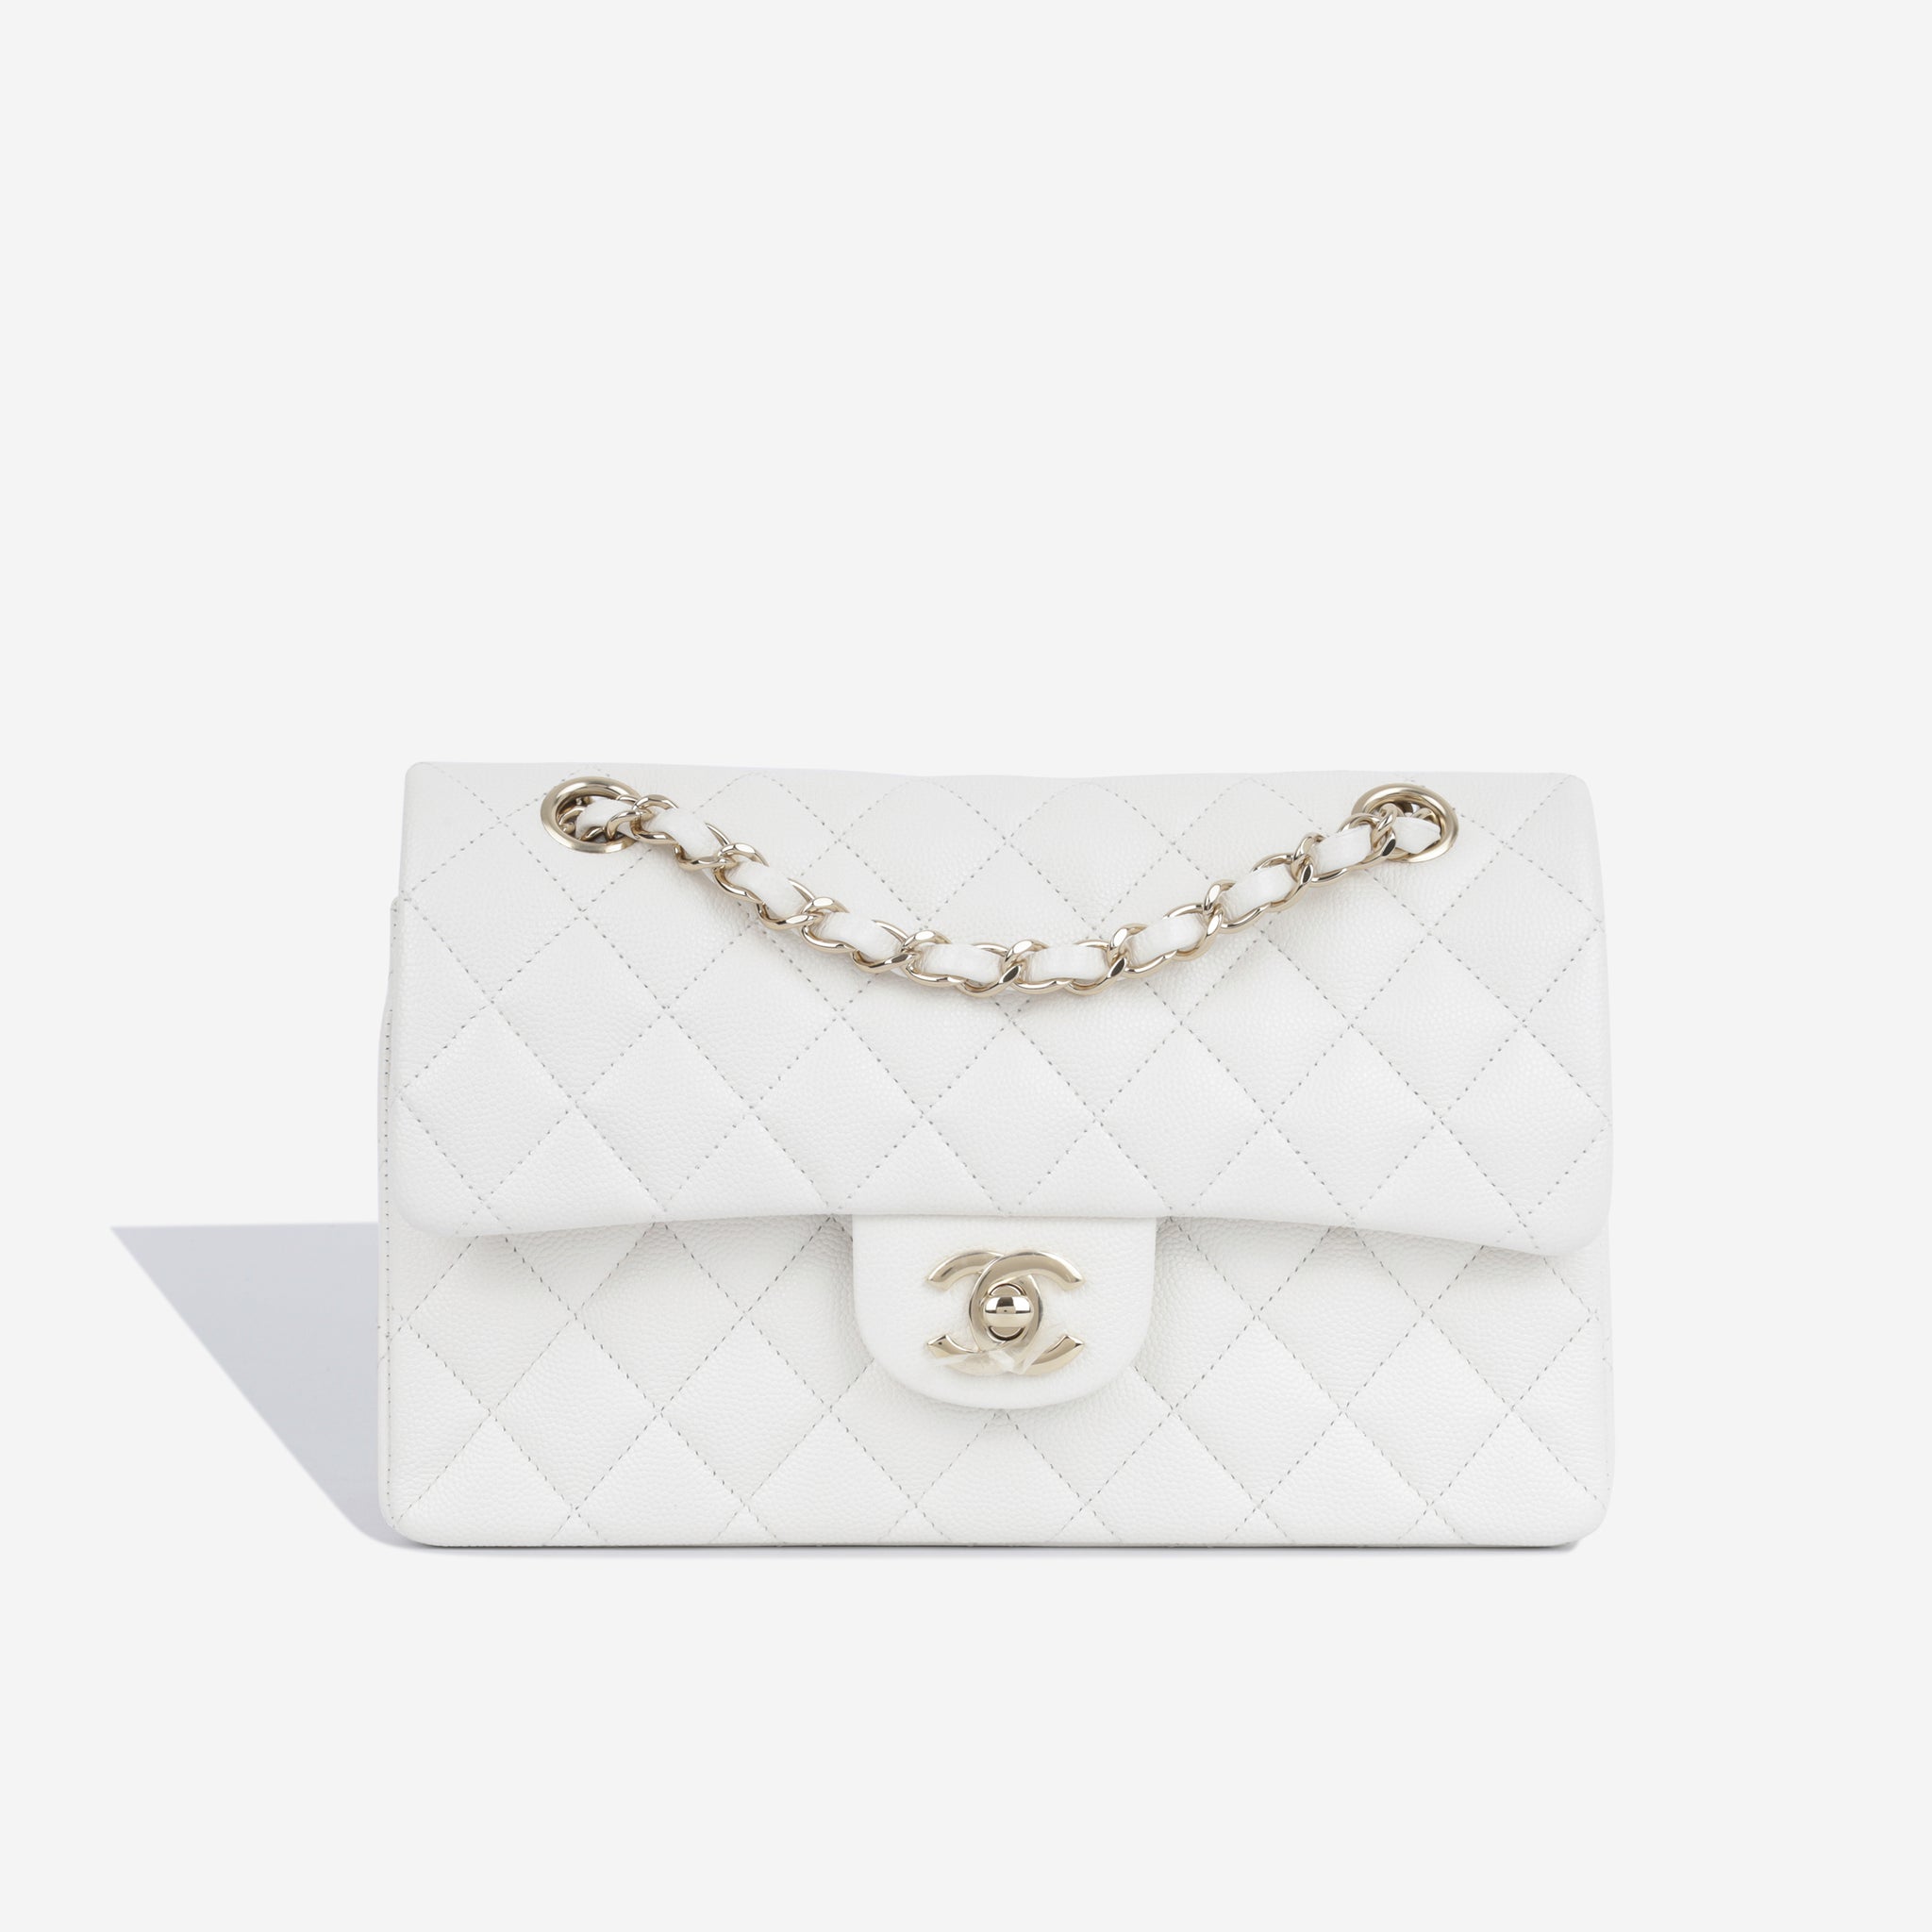 Chanel Small Classic Flap Bag in White Lambskin with golden hardware |  Chanel small classic, Classic flap bag, Chanel bag classic